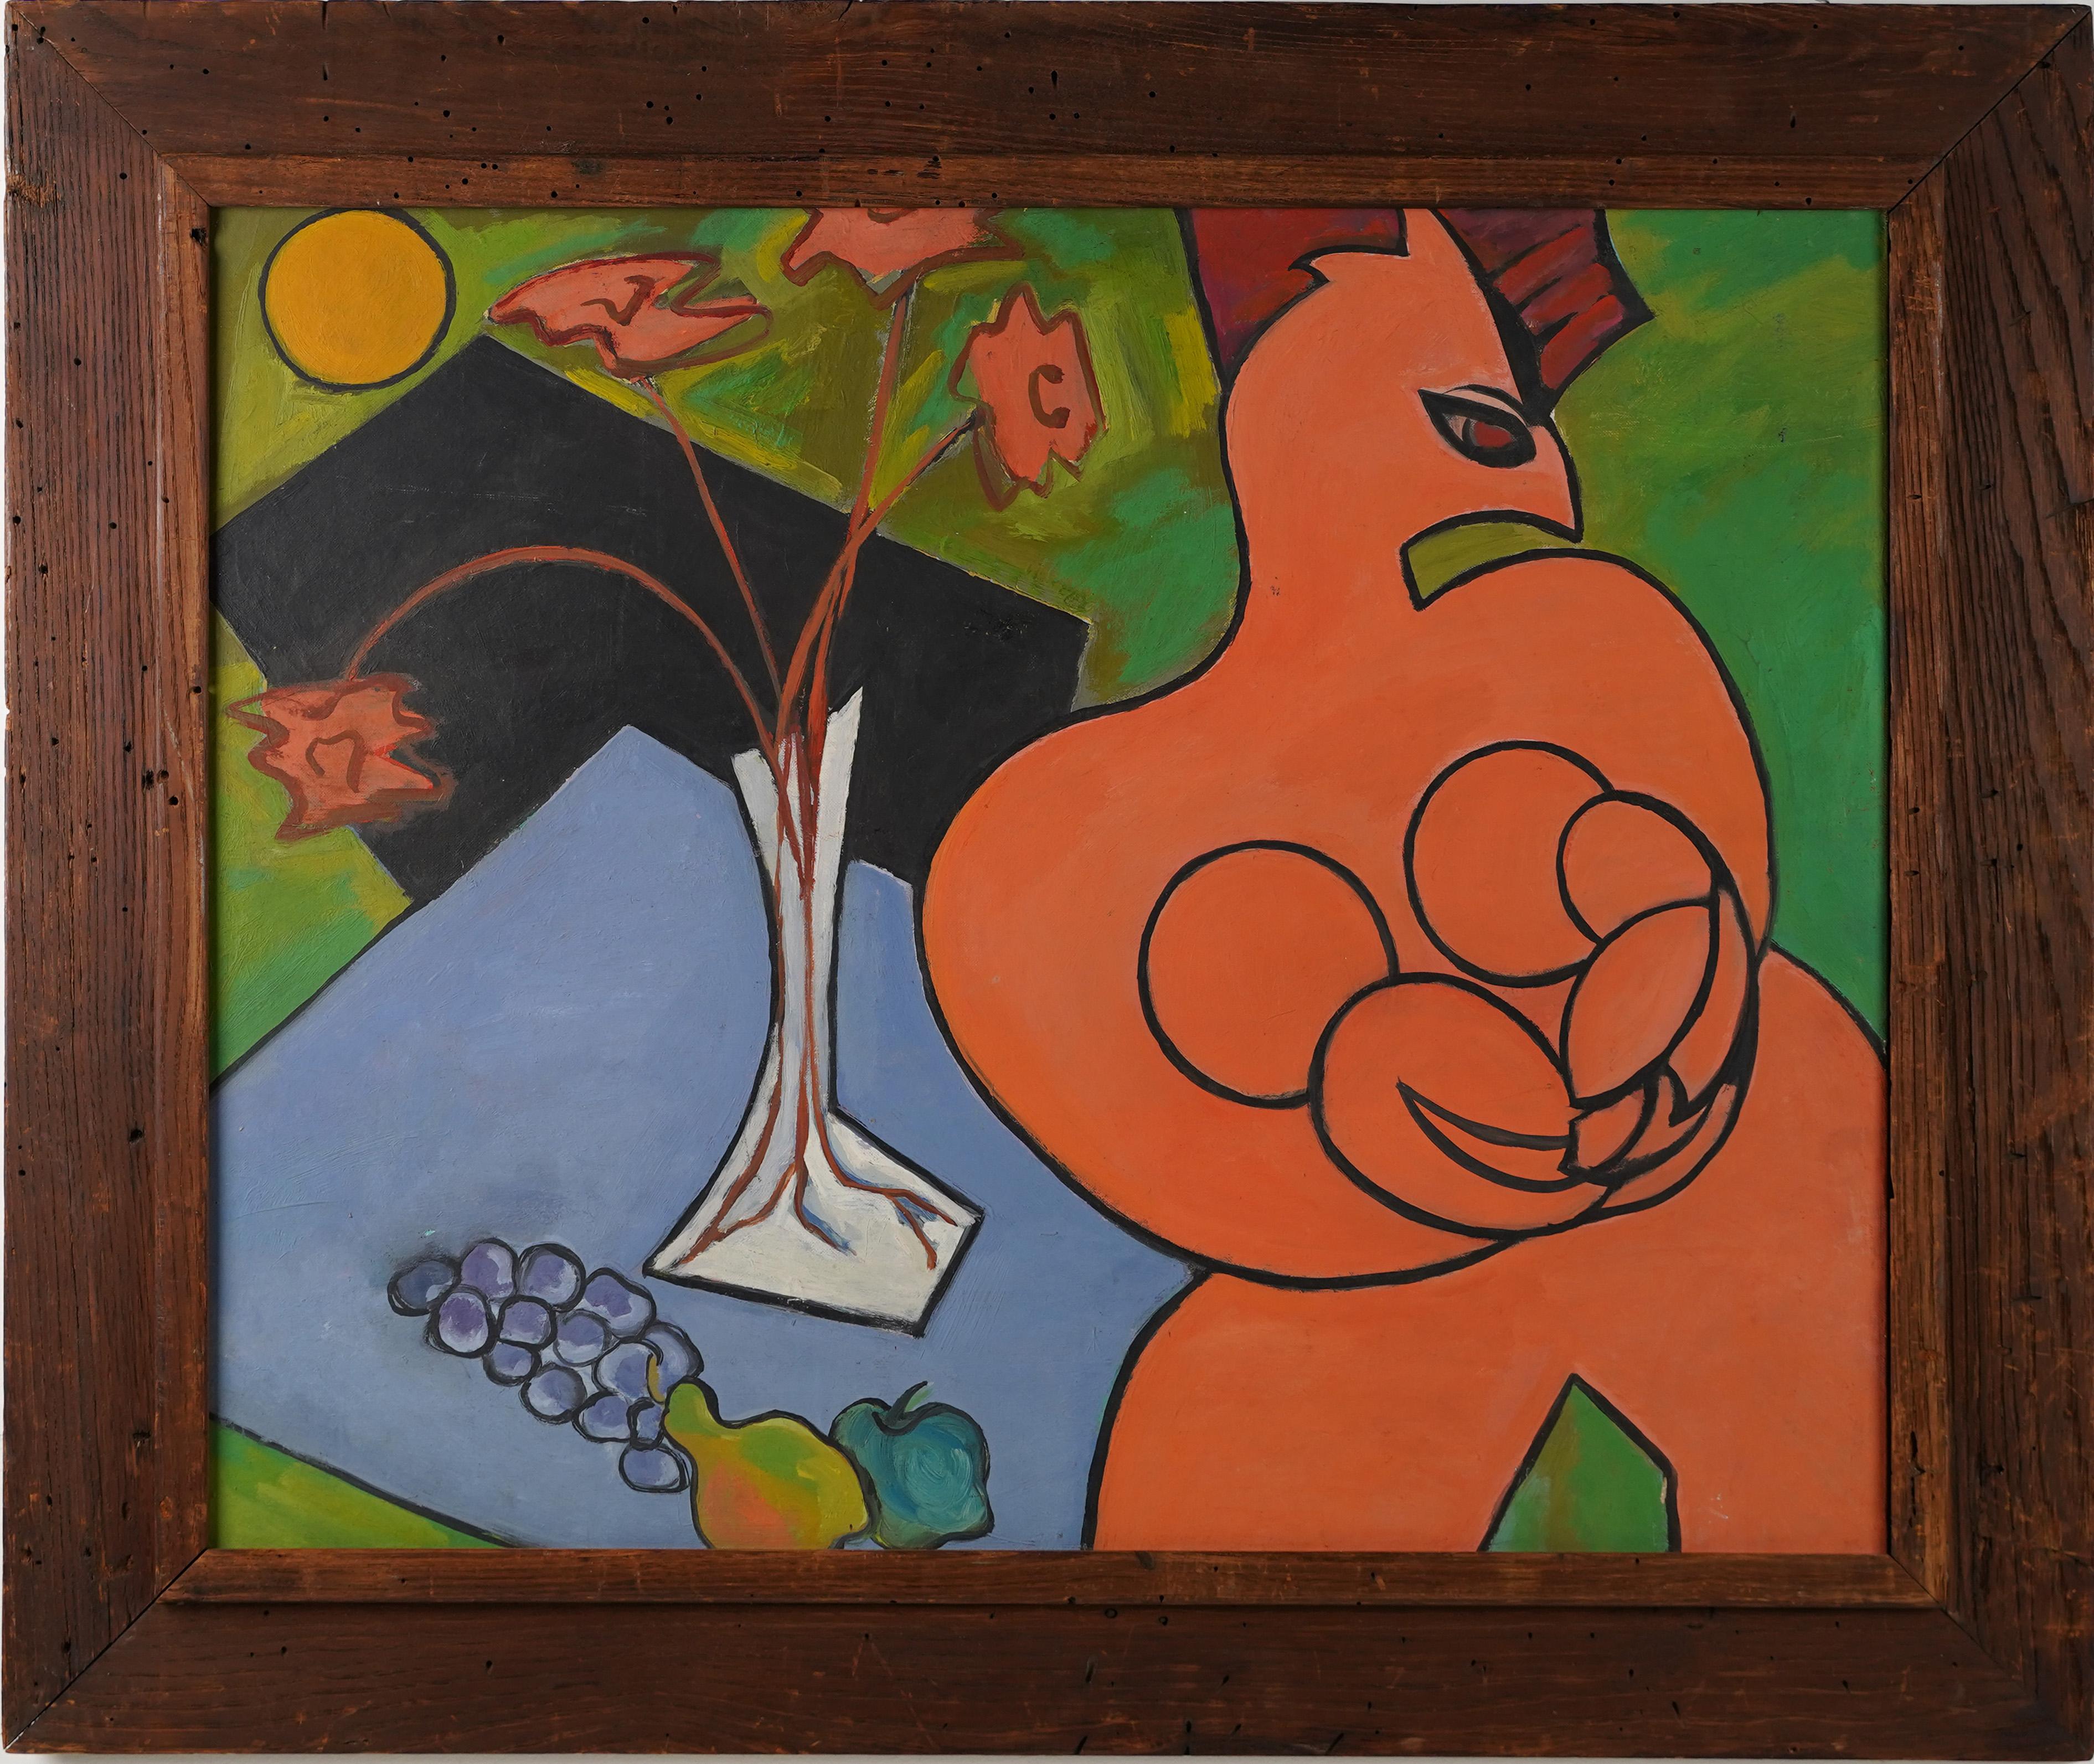 Unknown Abstract Painting - Antique American Modernist "Funky Chicken" Cubist Still Life Framed Oil Painting